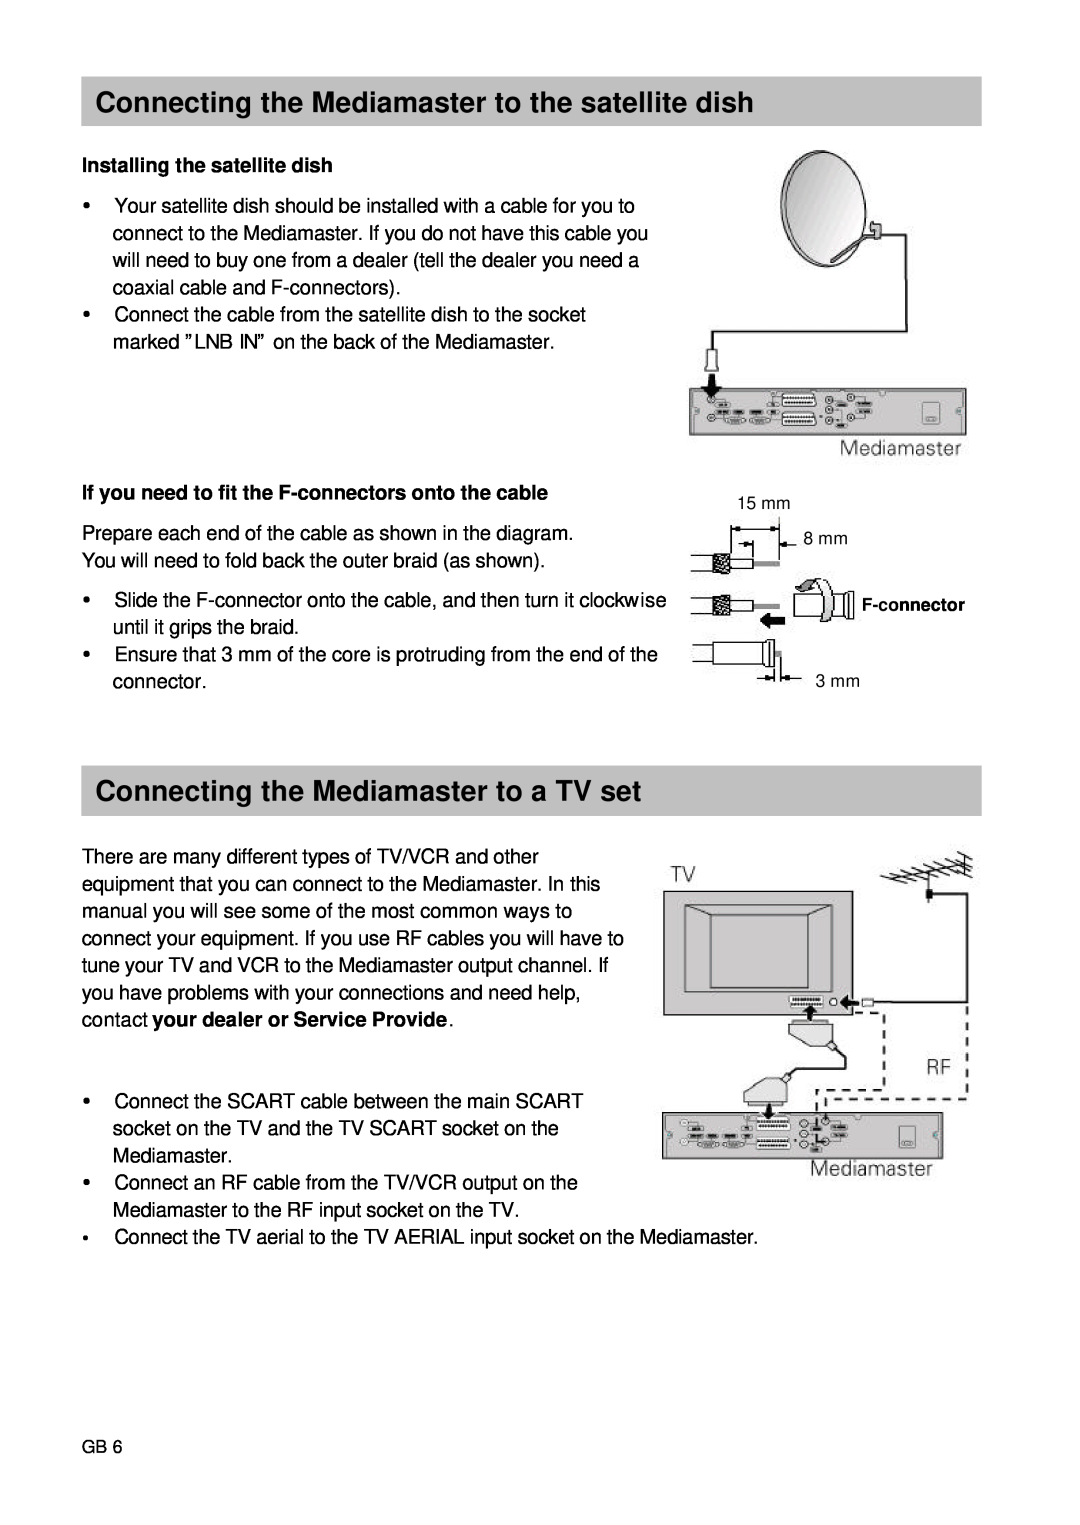 Nokia 9660S owner manual Connecting the Mediamaster to the satellite dish, Connecting the Mediamaster to a TV set 